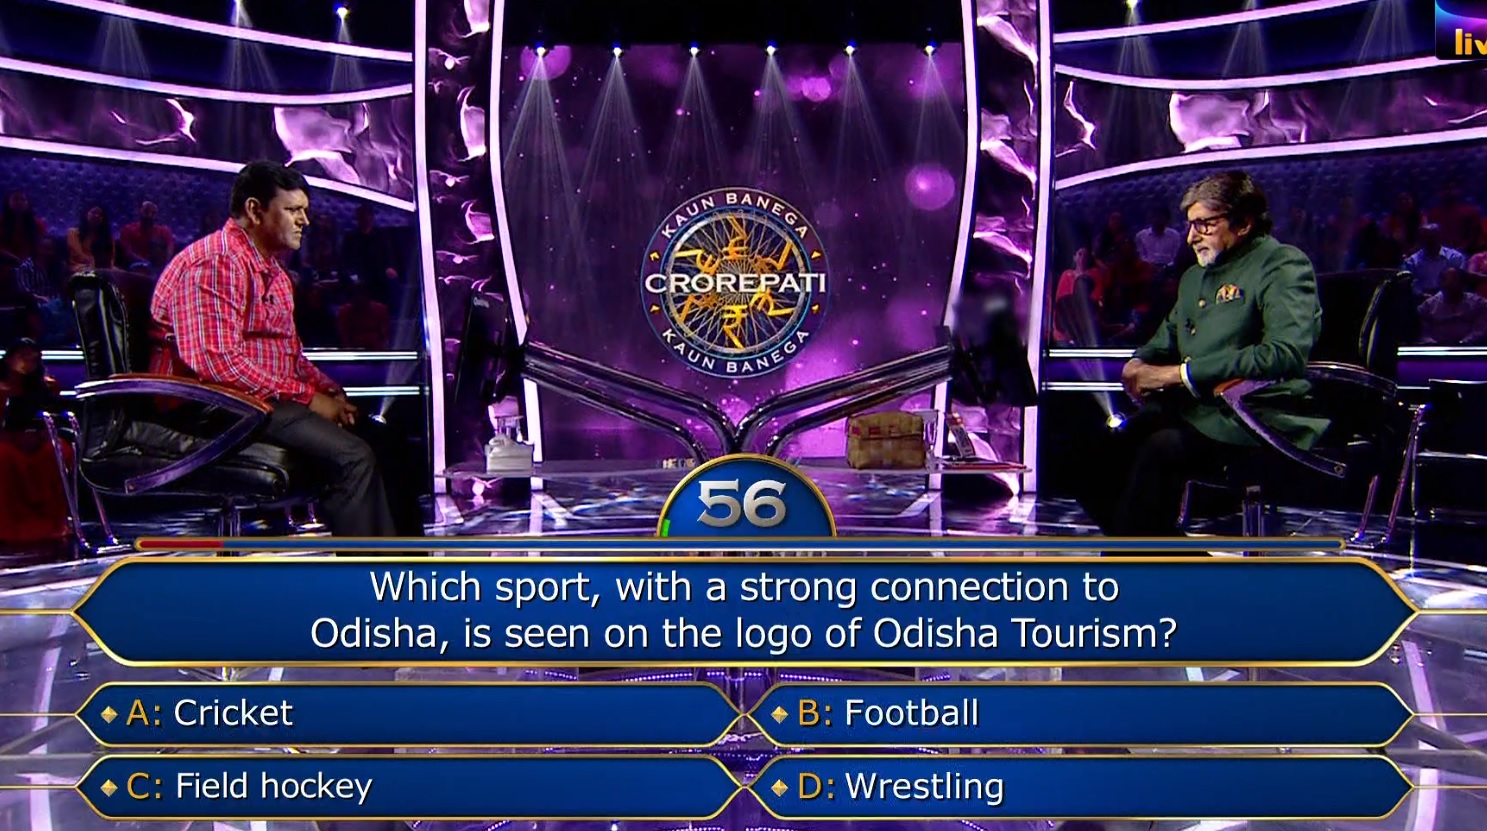 Ques : Which sport, with a strong connection to Odisha, is seen on the logo of Odisha Tourism?